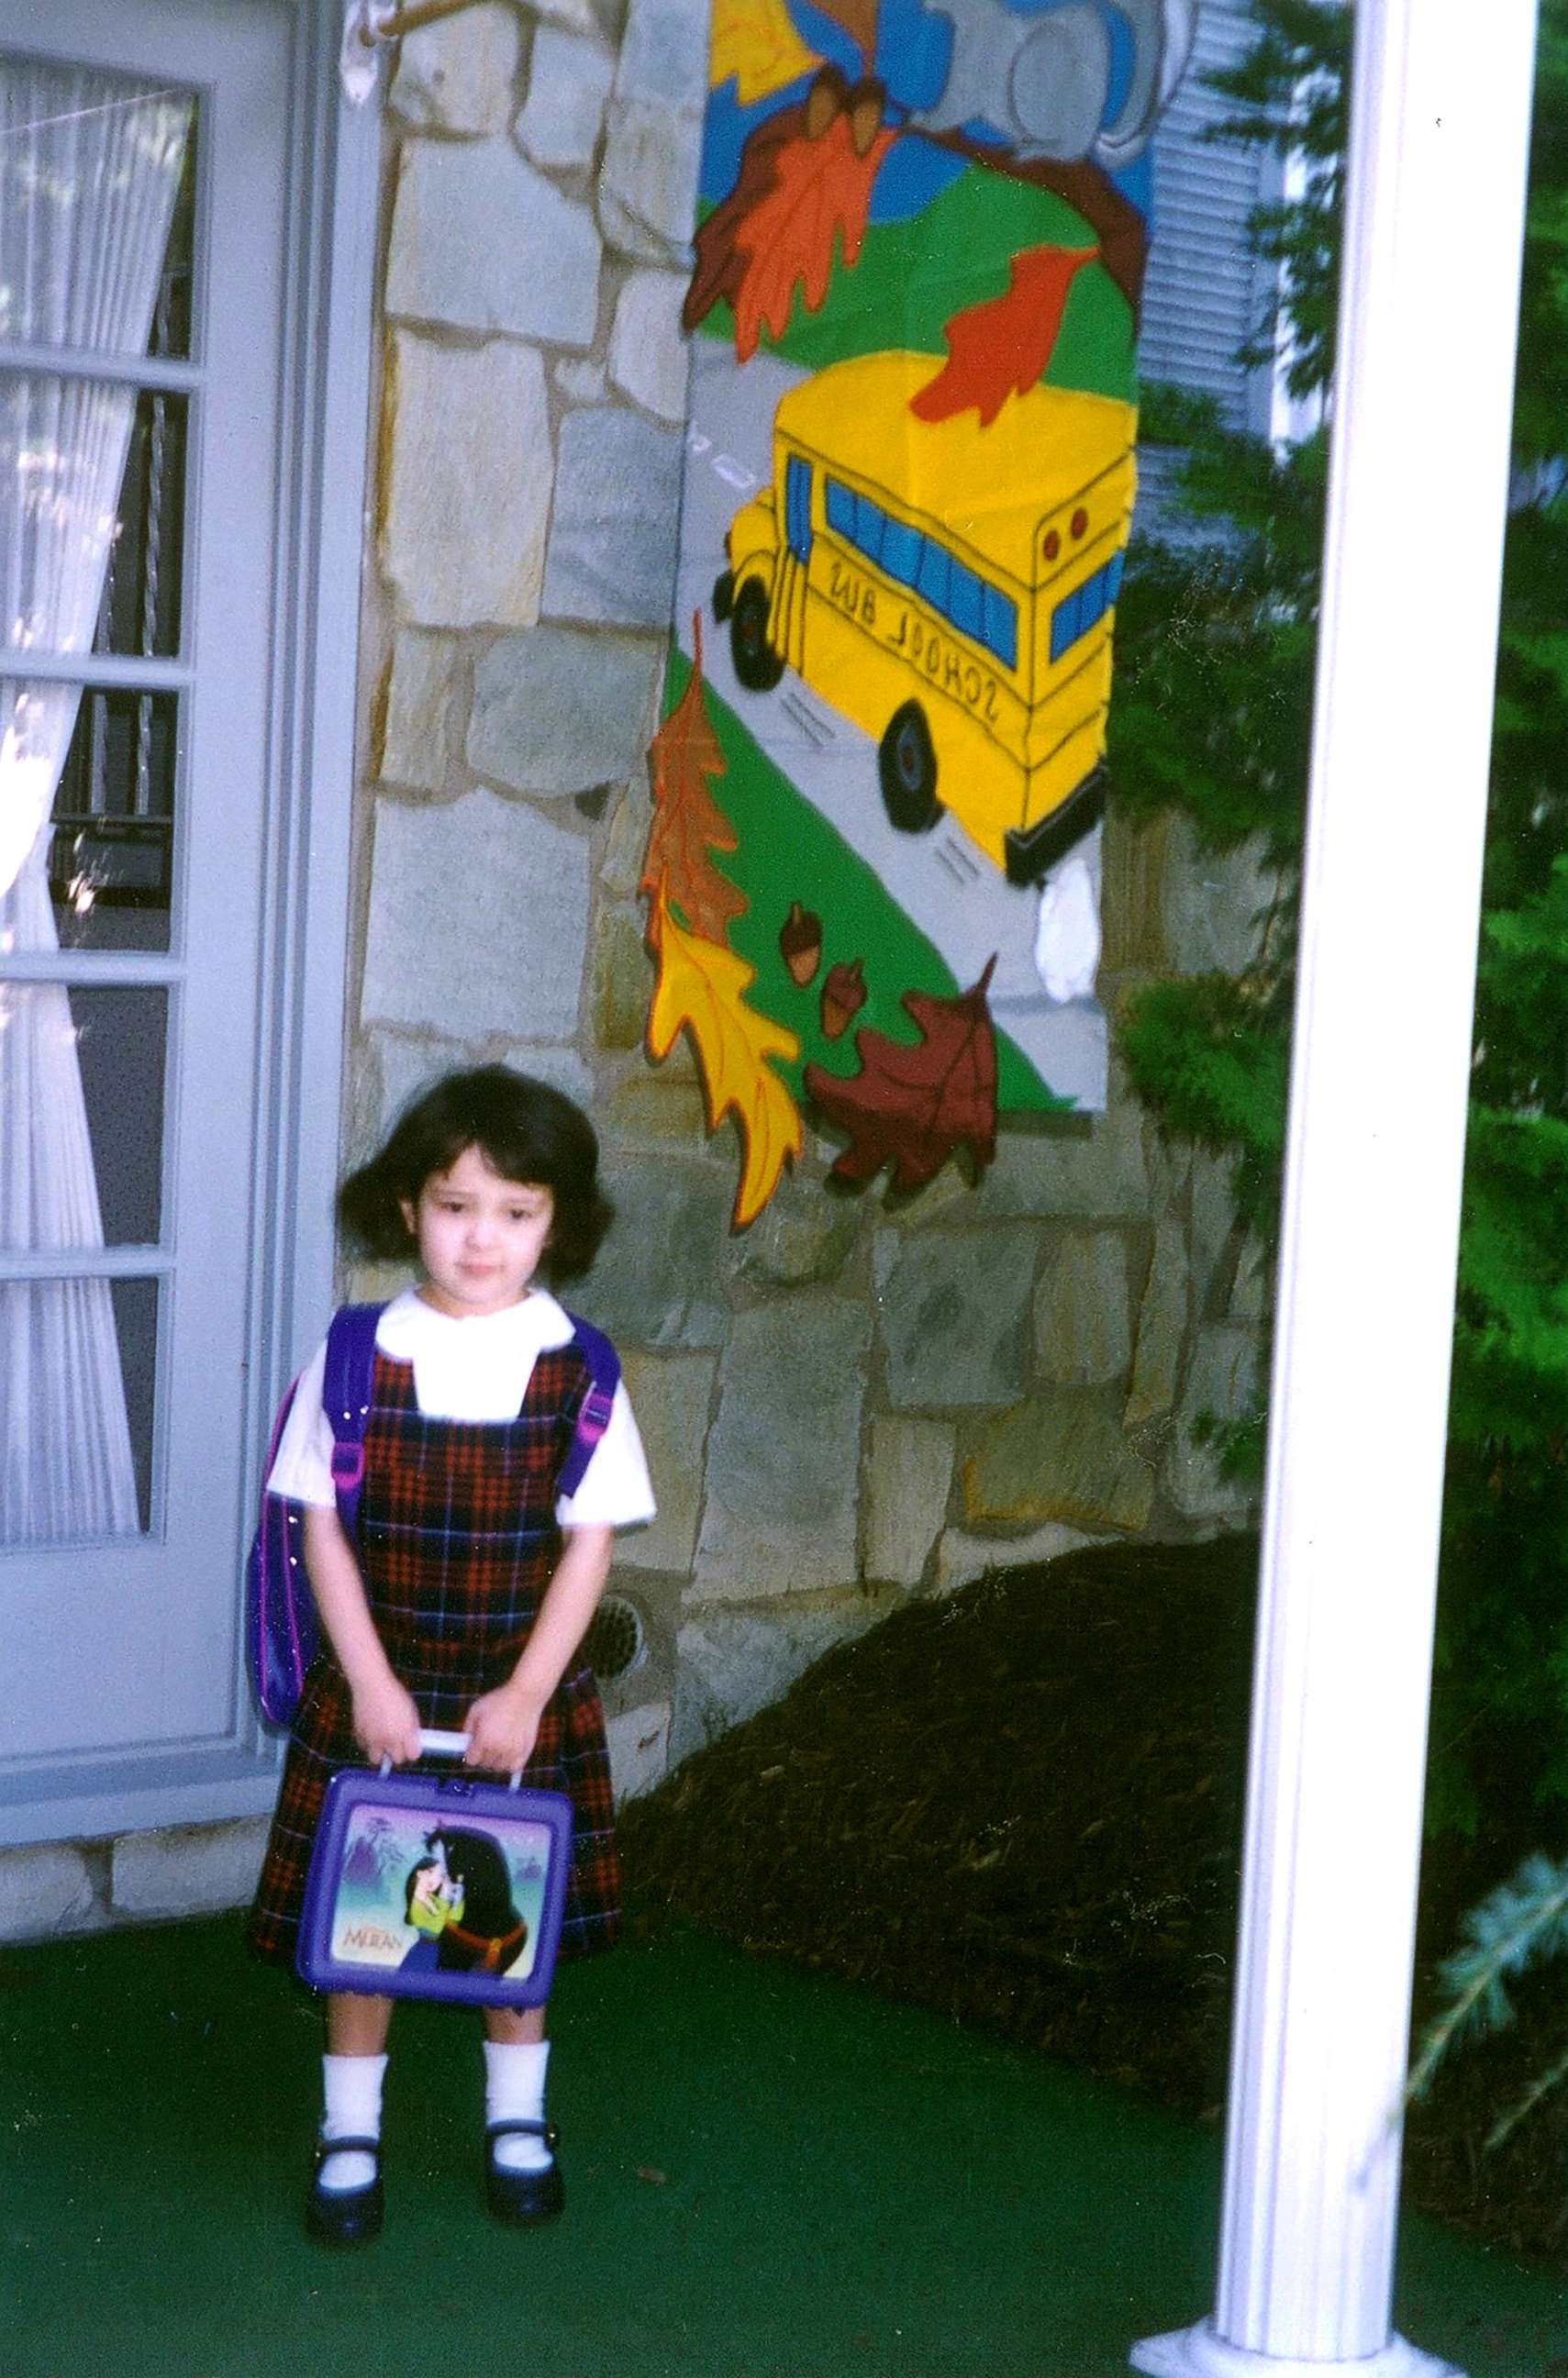 PHOTO: Standing in front of my house before heading off to Kindergarten with my "Mulan" lunchbox. 